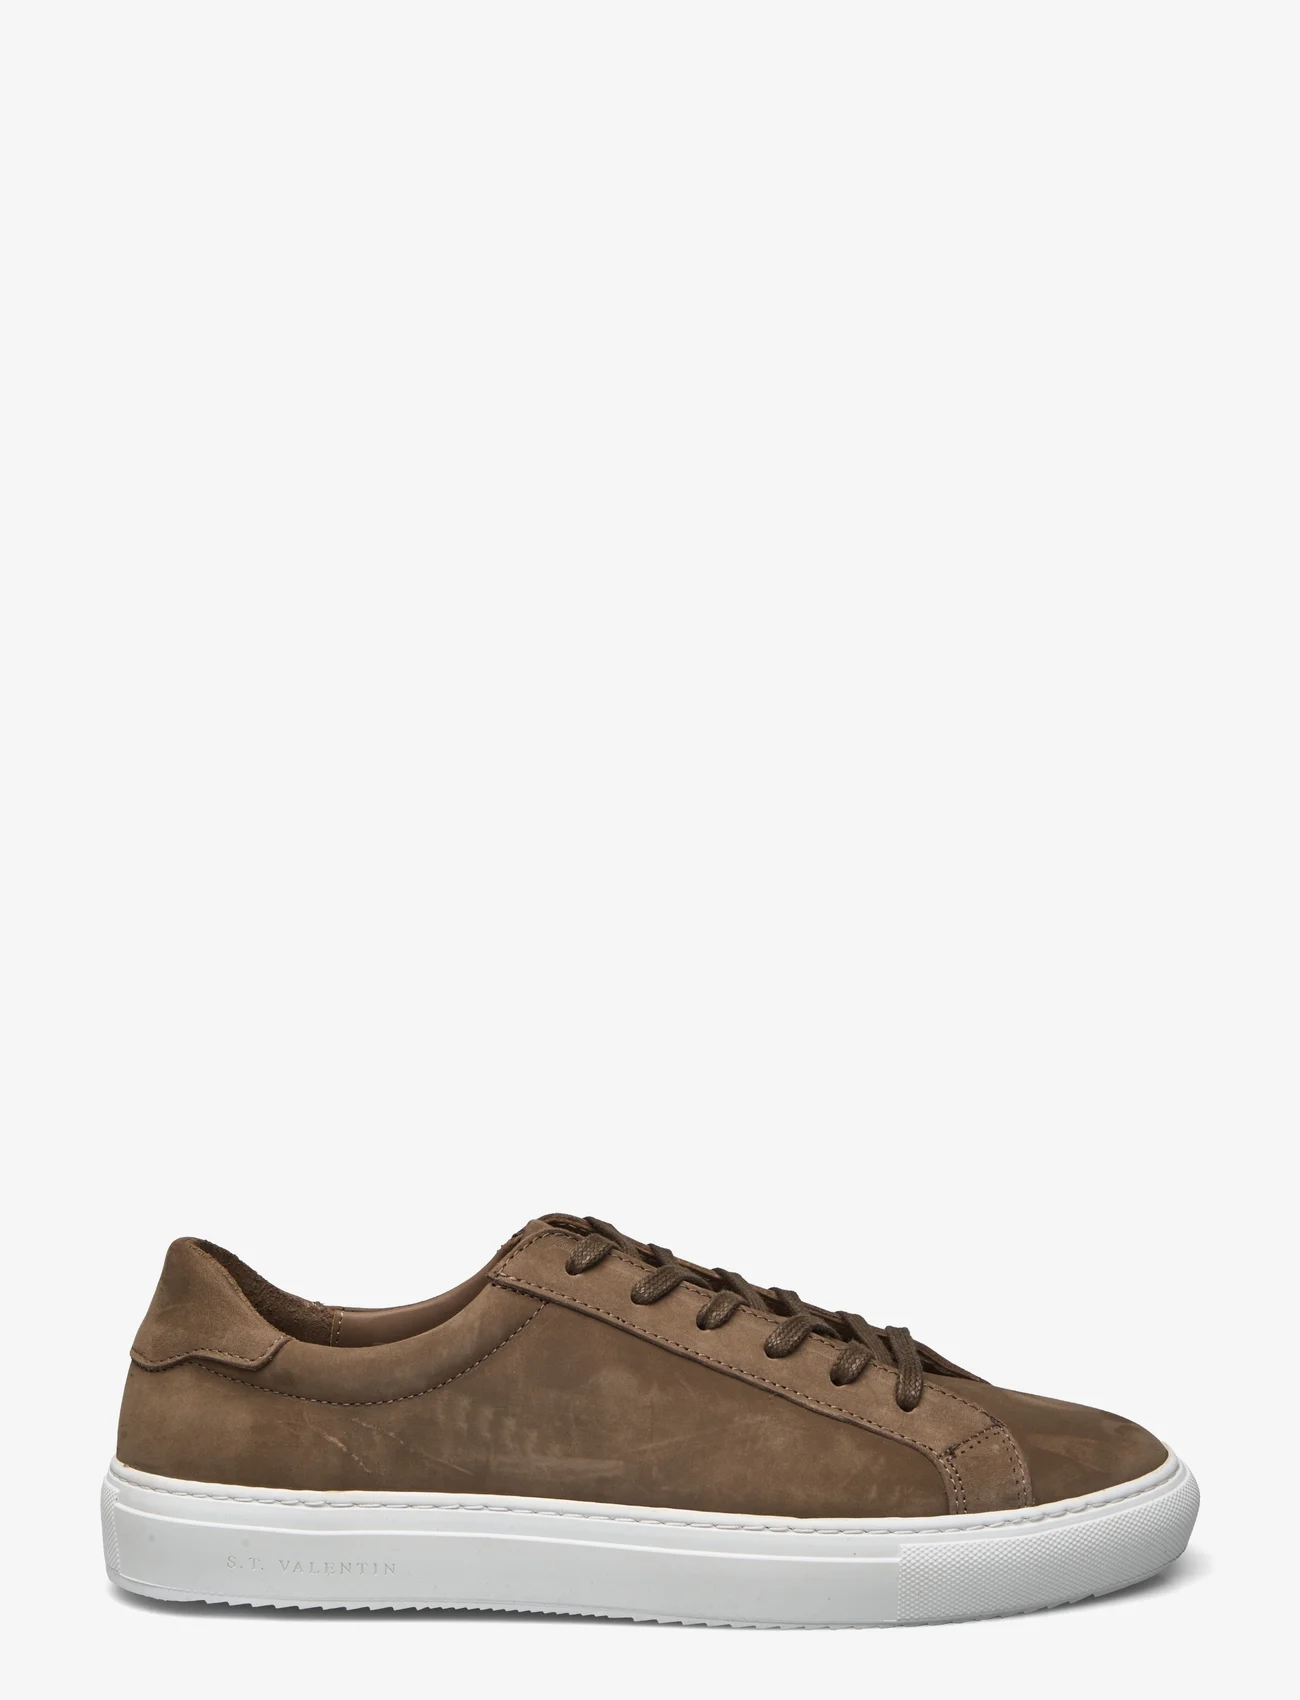 S.T. VALENTIN - Classic Sneaker -Grained leather - lave sneakers - taupe - 1